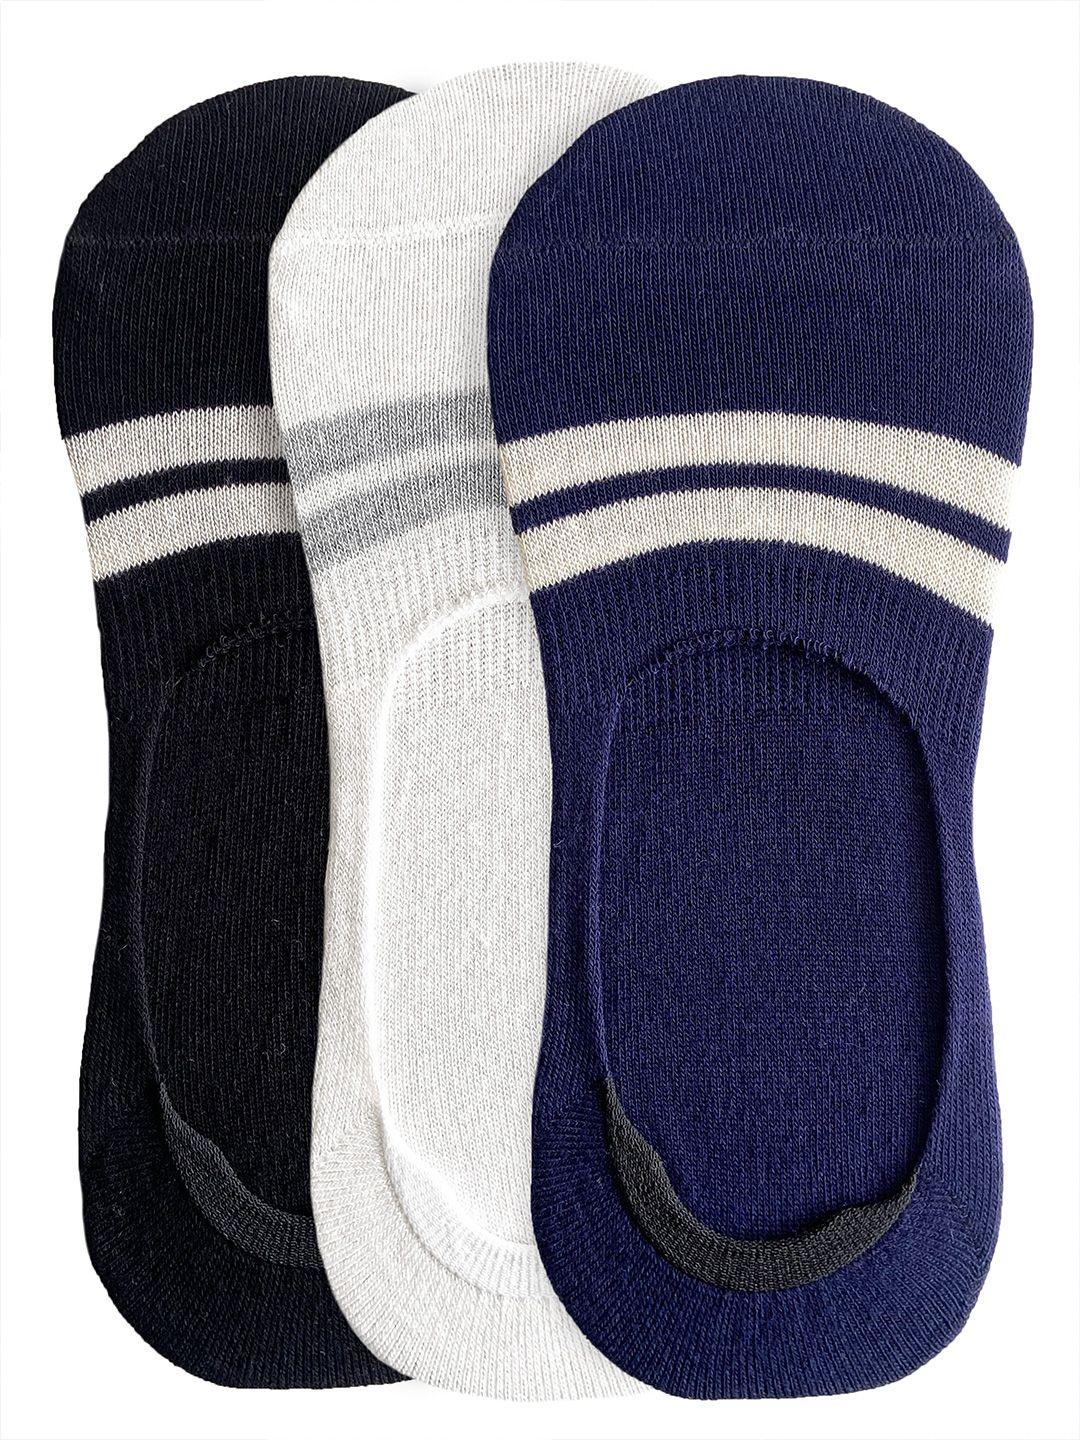 heelium men navy blue and white pack of 3 striped shoe liners